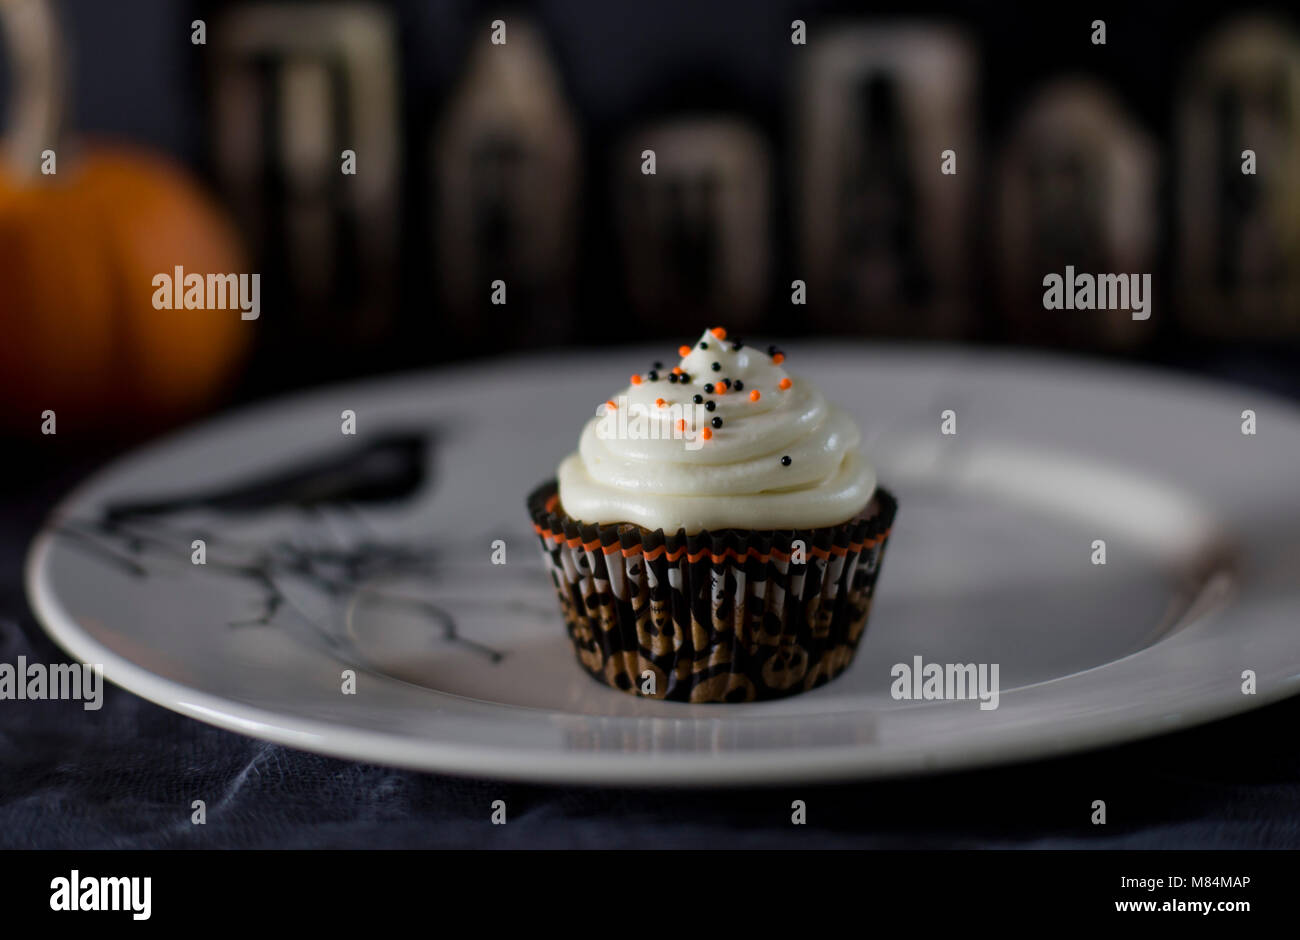 Delicious Pumpkin Halloween Themed Cupcake on a White Plate Stock Photo